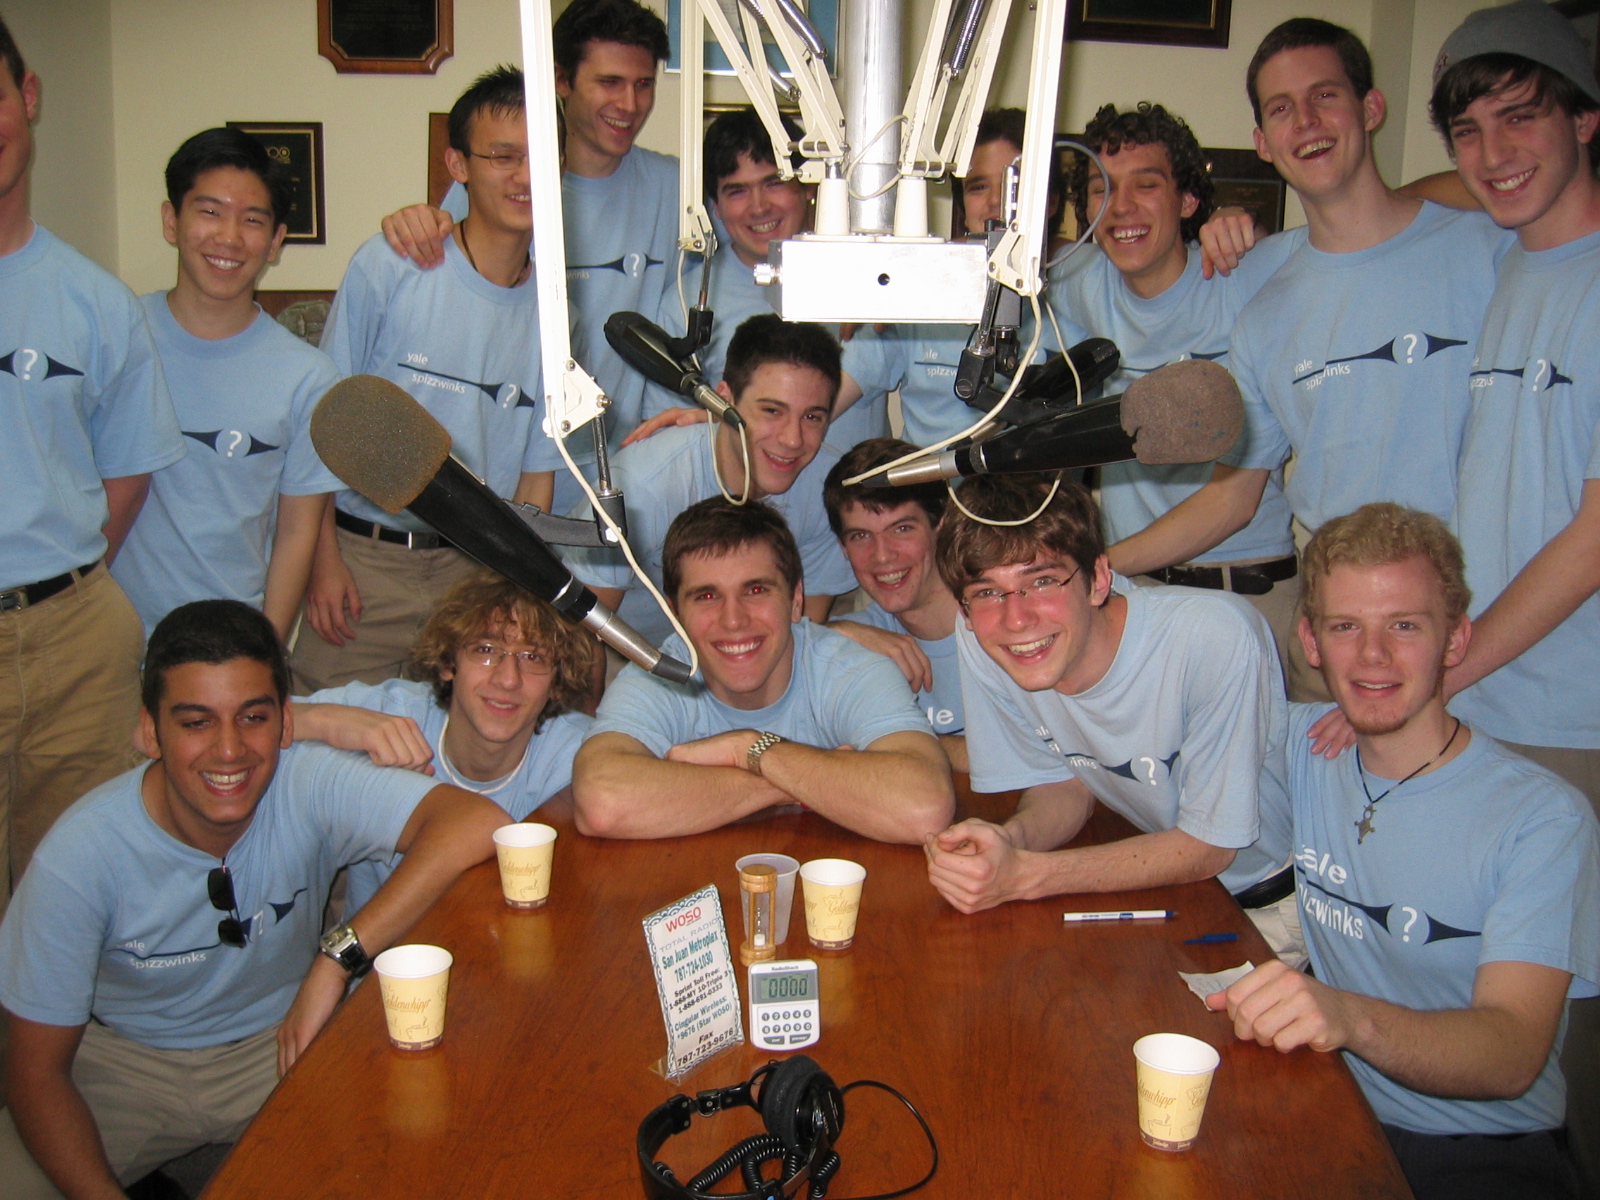 The Spizzwinks(?) of 2005 sing on the radio in Puerto Rico